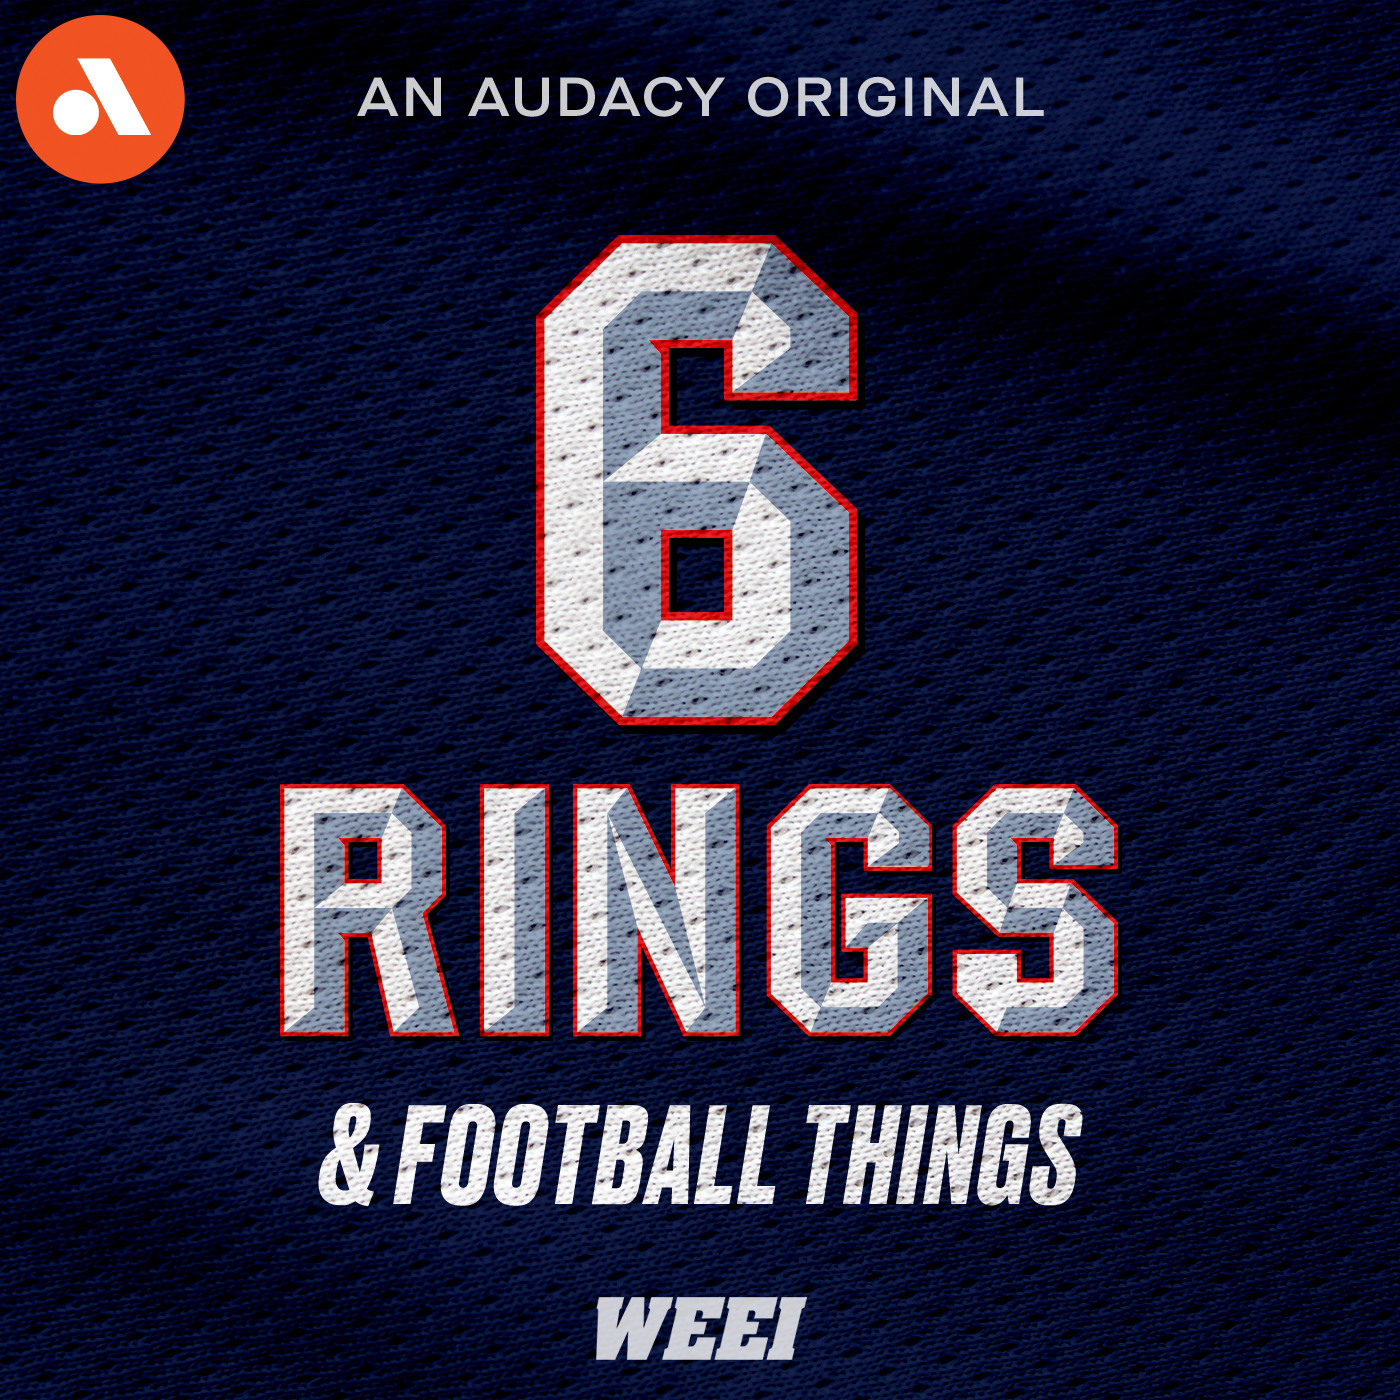 BONUS: How Similar Are The States Of These Two Franchises? | '6 Rings & Football Things'